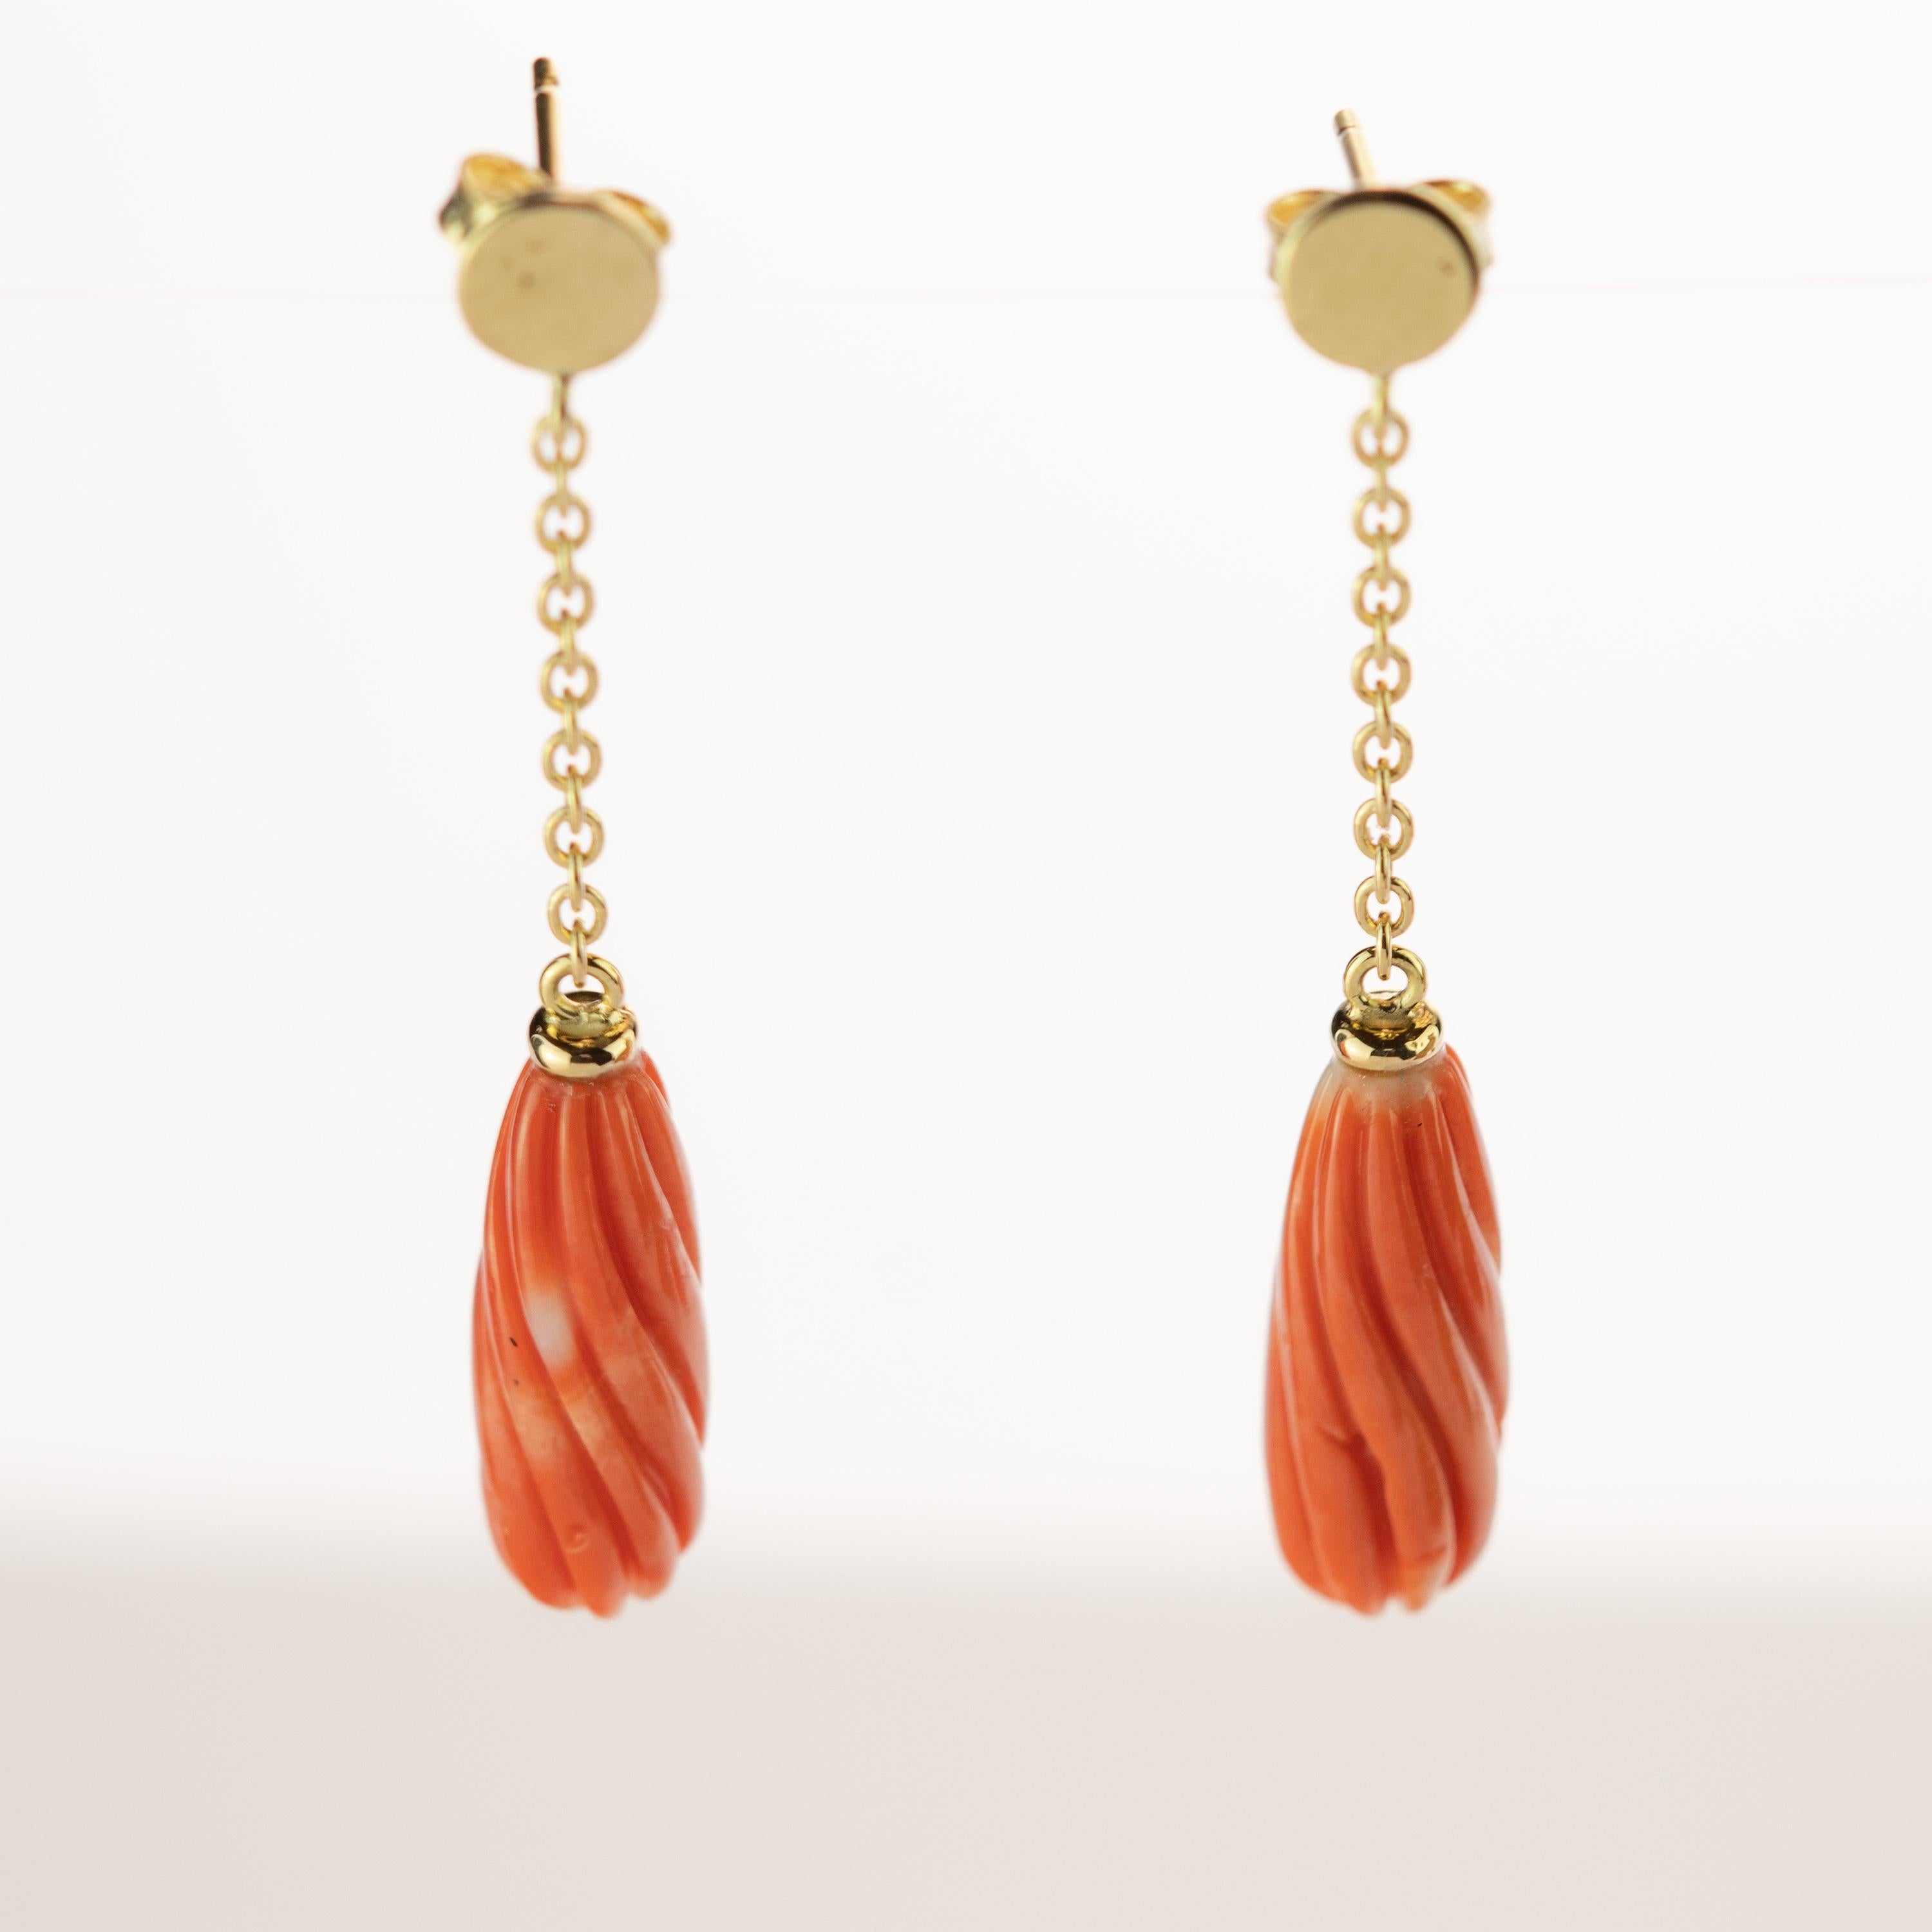 Exotic earrings design. The 18 karat yellow gold enhances the piece with a round circle that is connected to a delicate chain holding a beautifully carved and light salmon natural coral long shaped gem. Italians own the art of coral carving. For